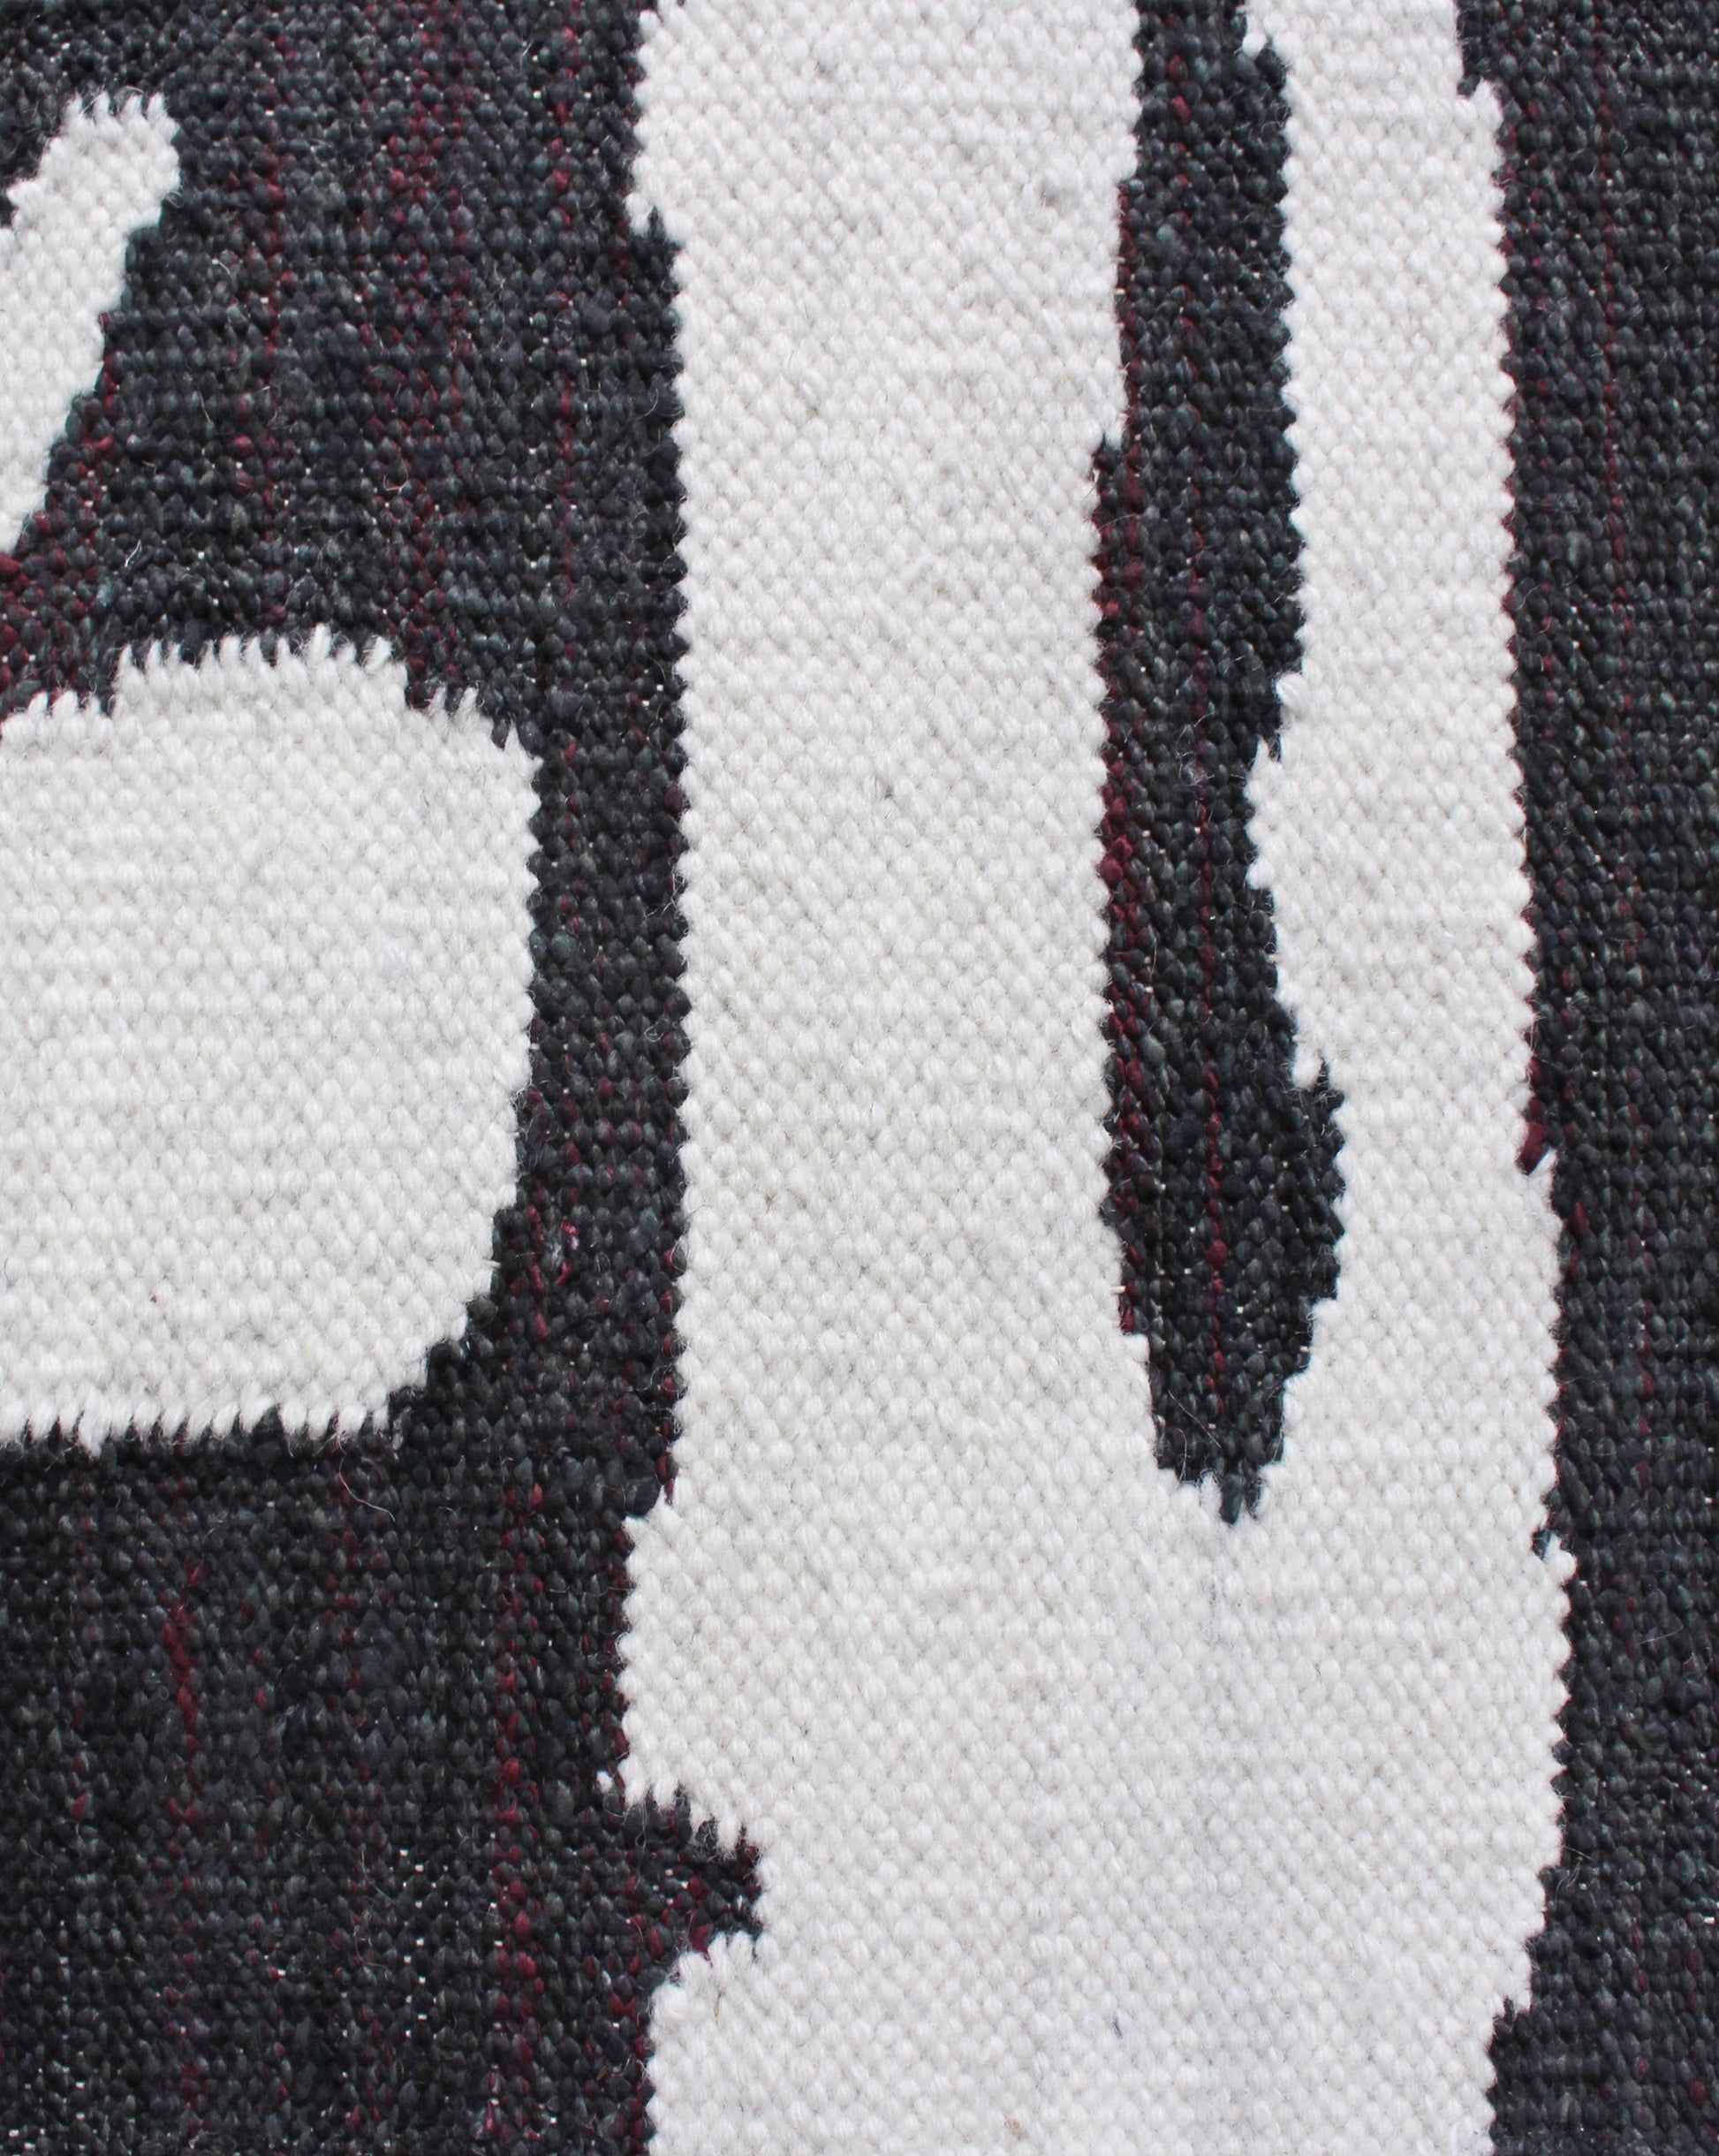 A close up of a black and white Banda Flatweave rug from Eskayel